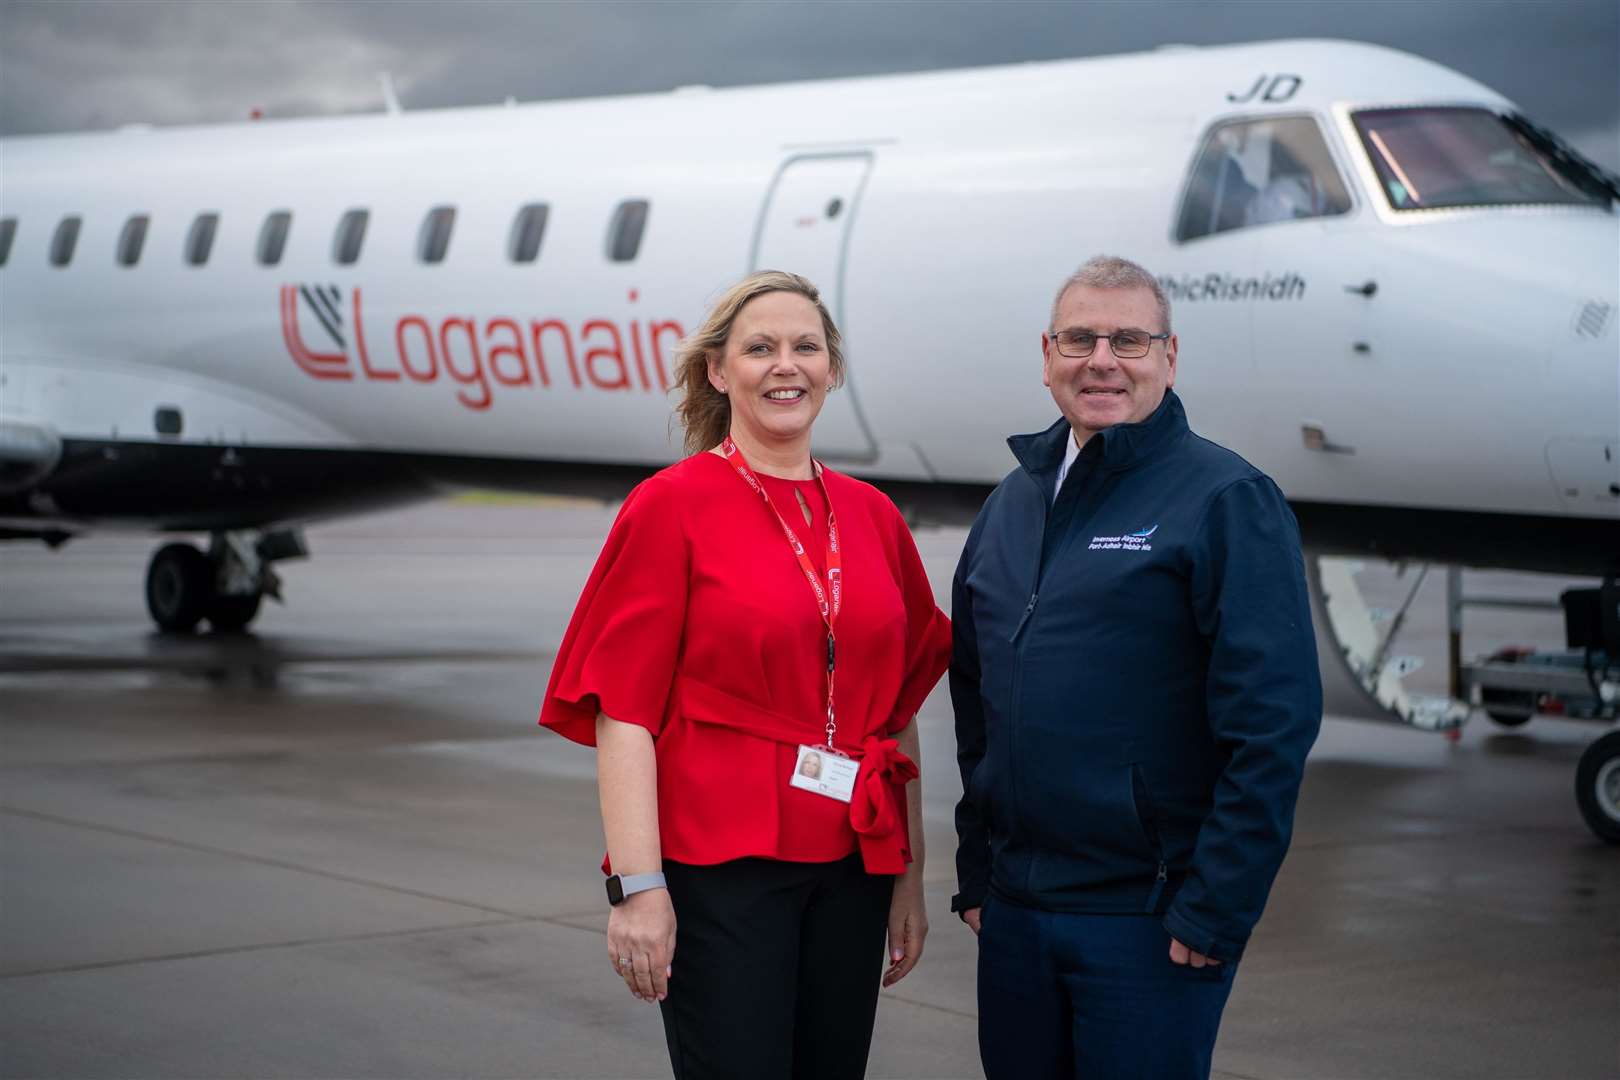 Donna McHugh, head of revenue and sales at Loganair, and Davie Geddes, terminal operation manager at Inverness Airport.